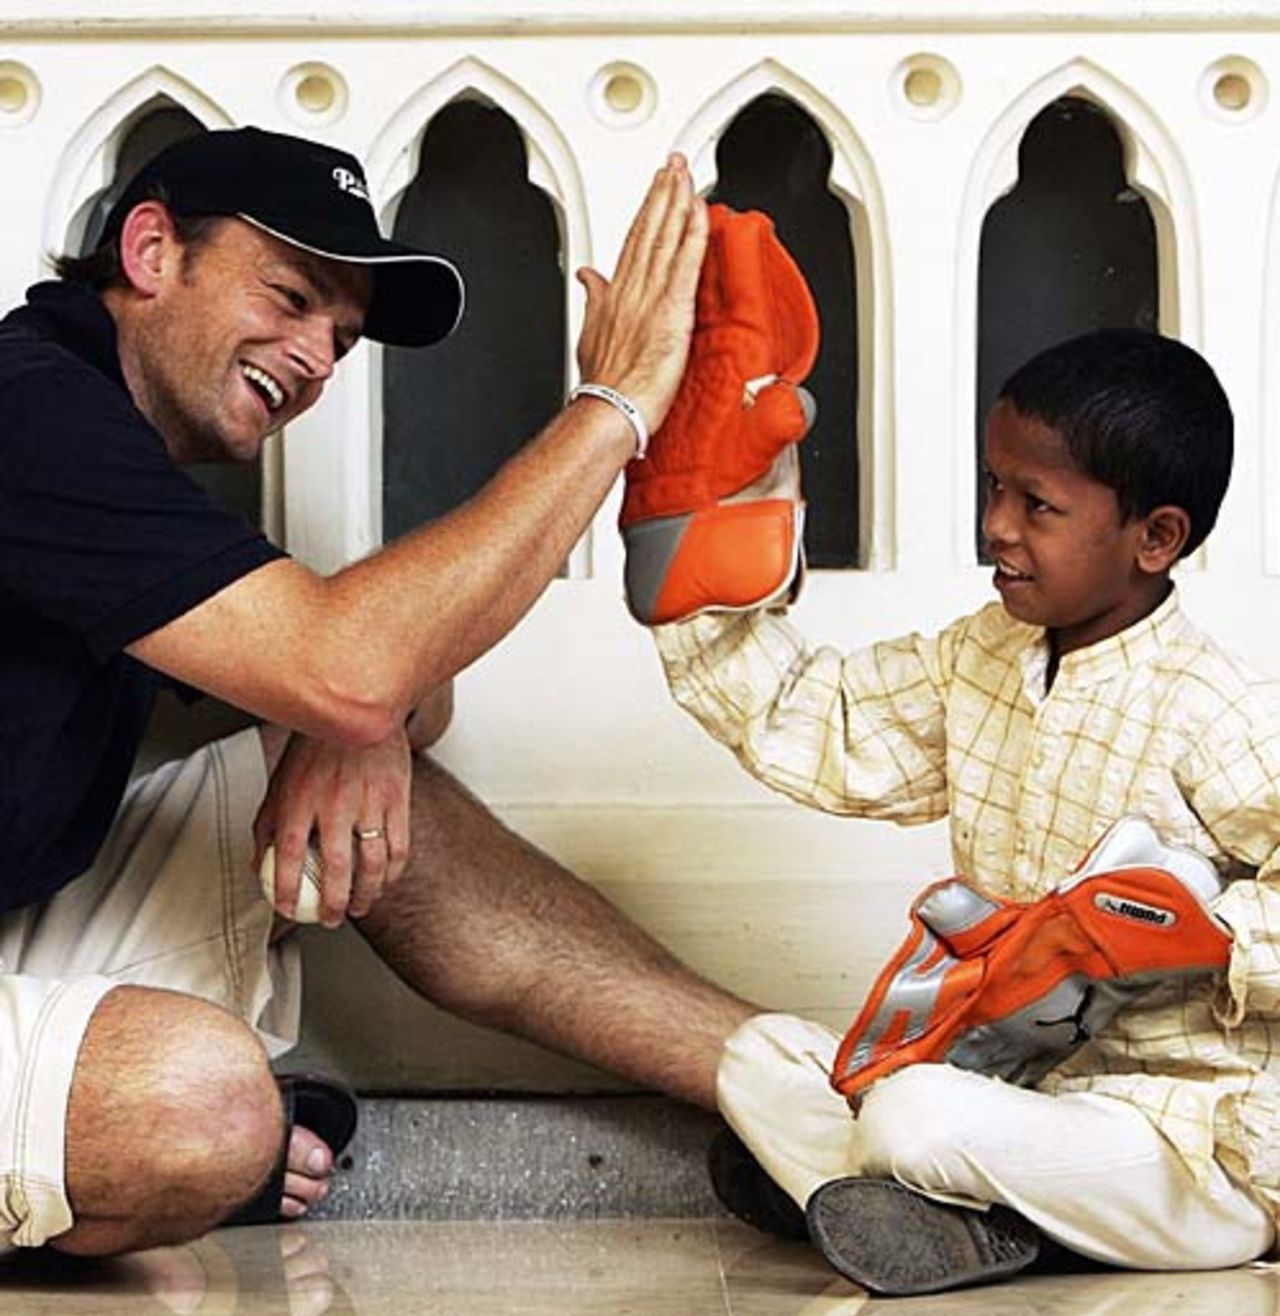 Adam Gilchrist has competition for the gloves giving five to Mangesh, the child he sponsors, Taj Mahal hotel, October 17, 2006